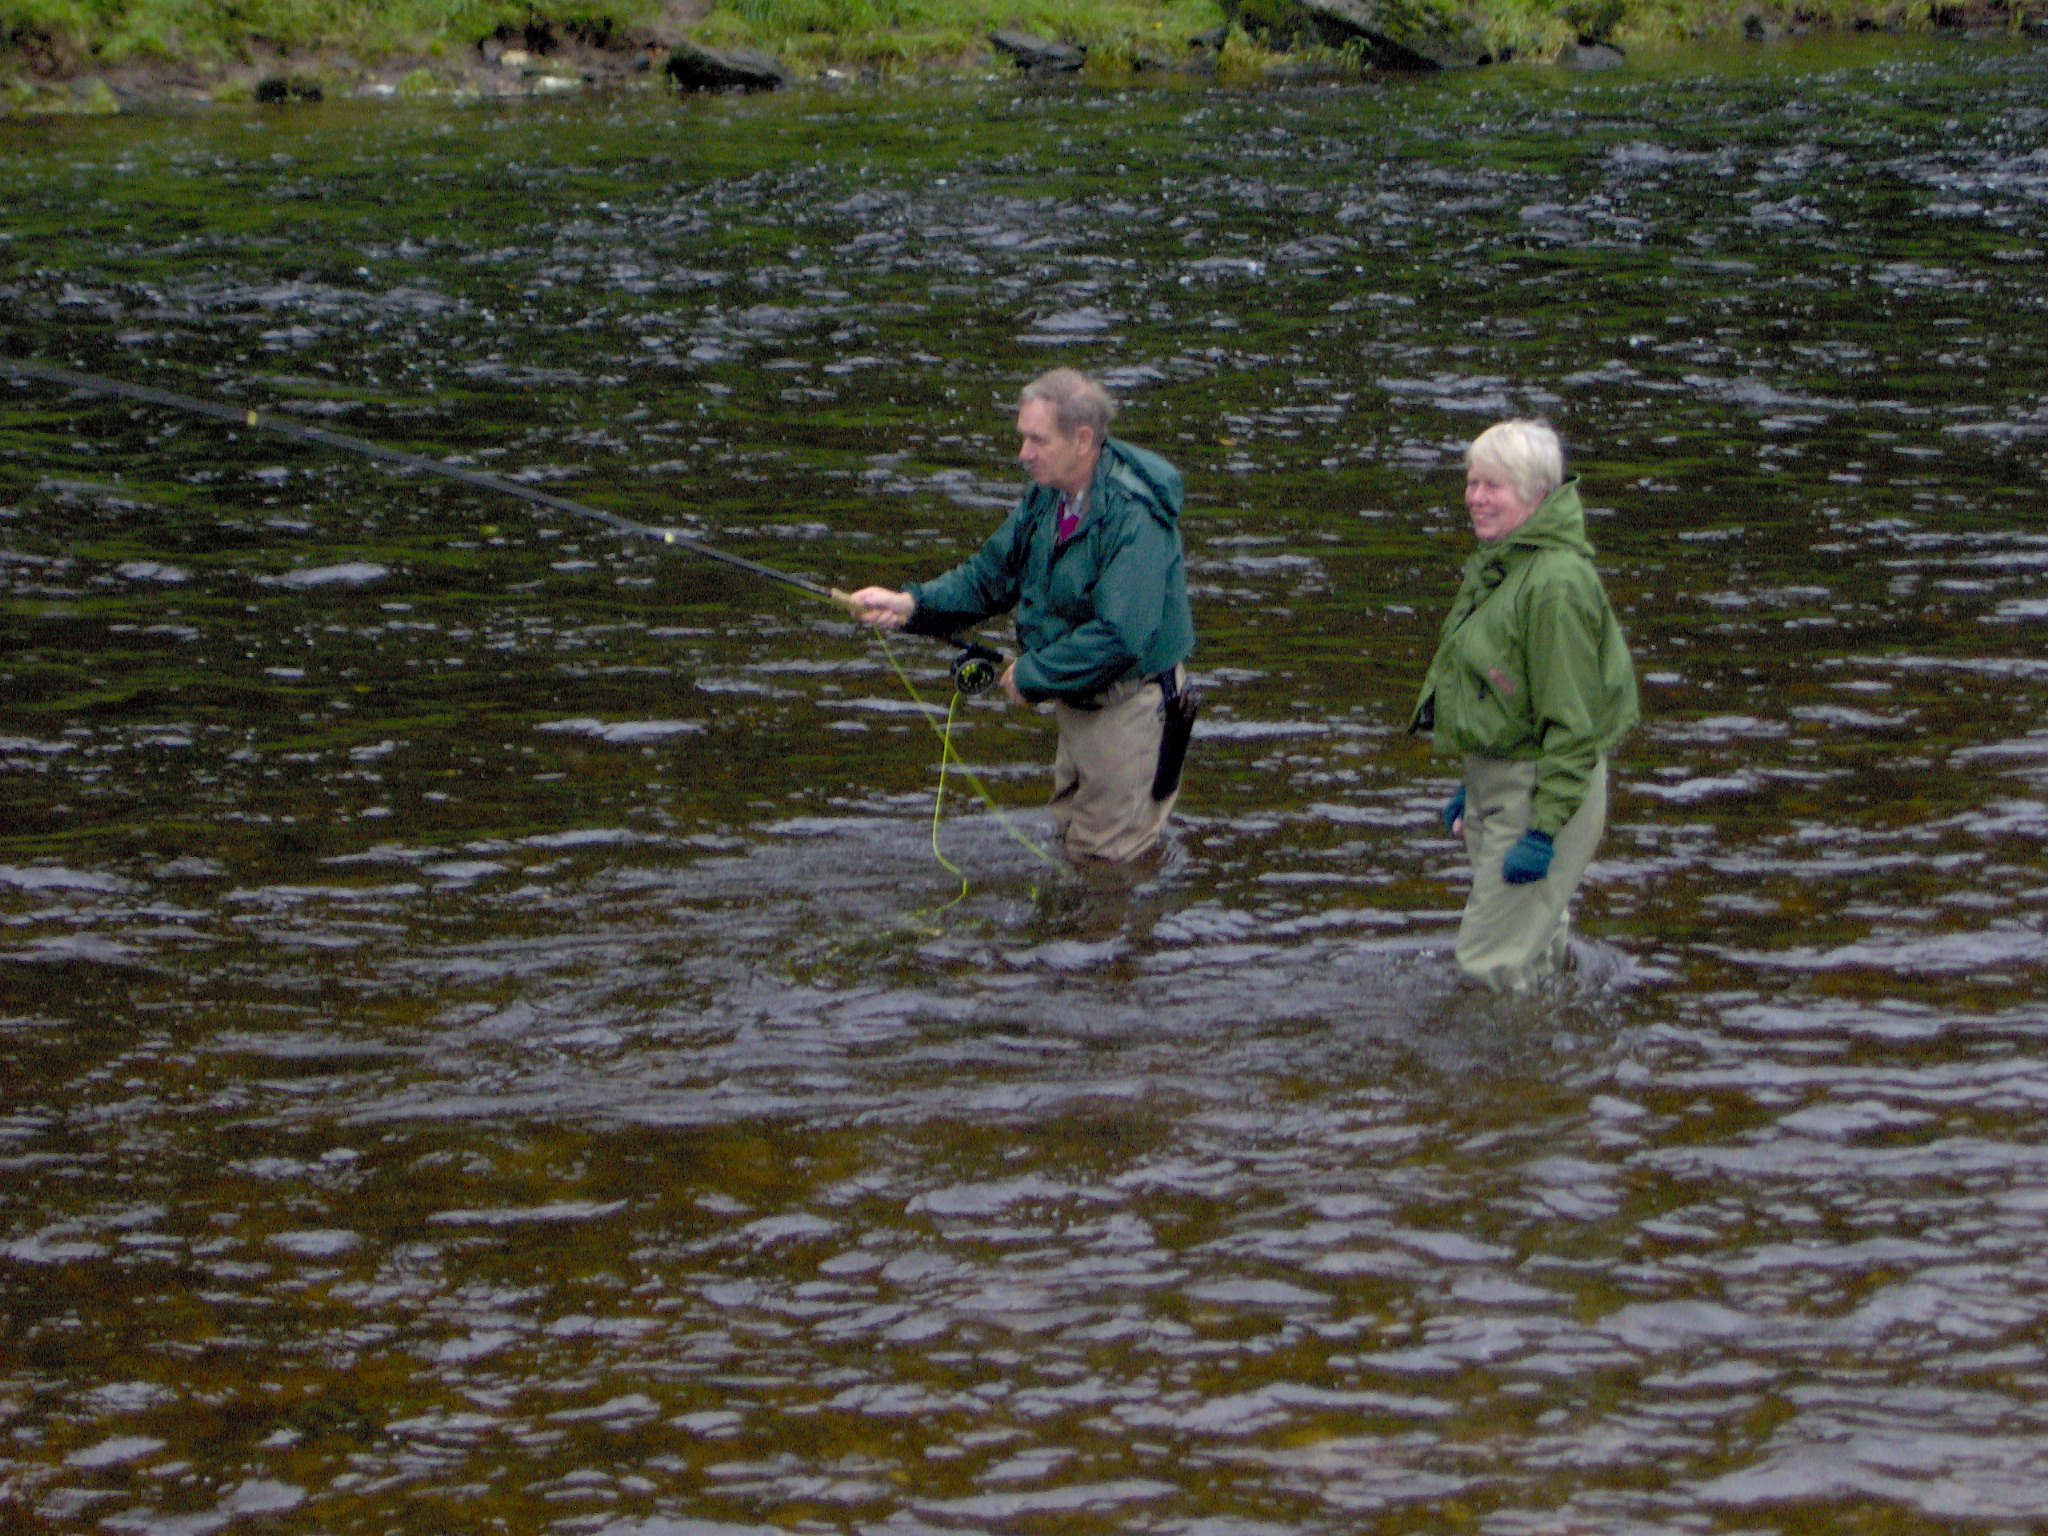 Playing a salmon on the Tay in Scotland